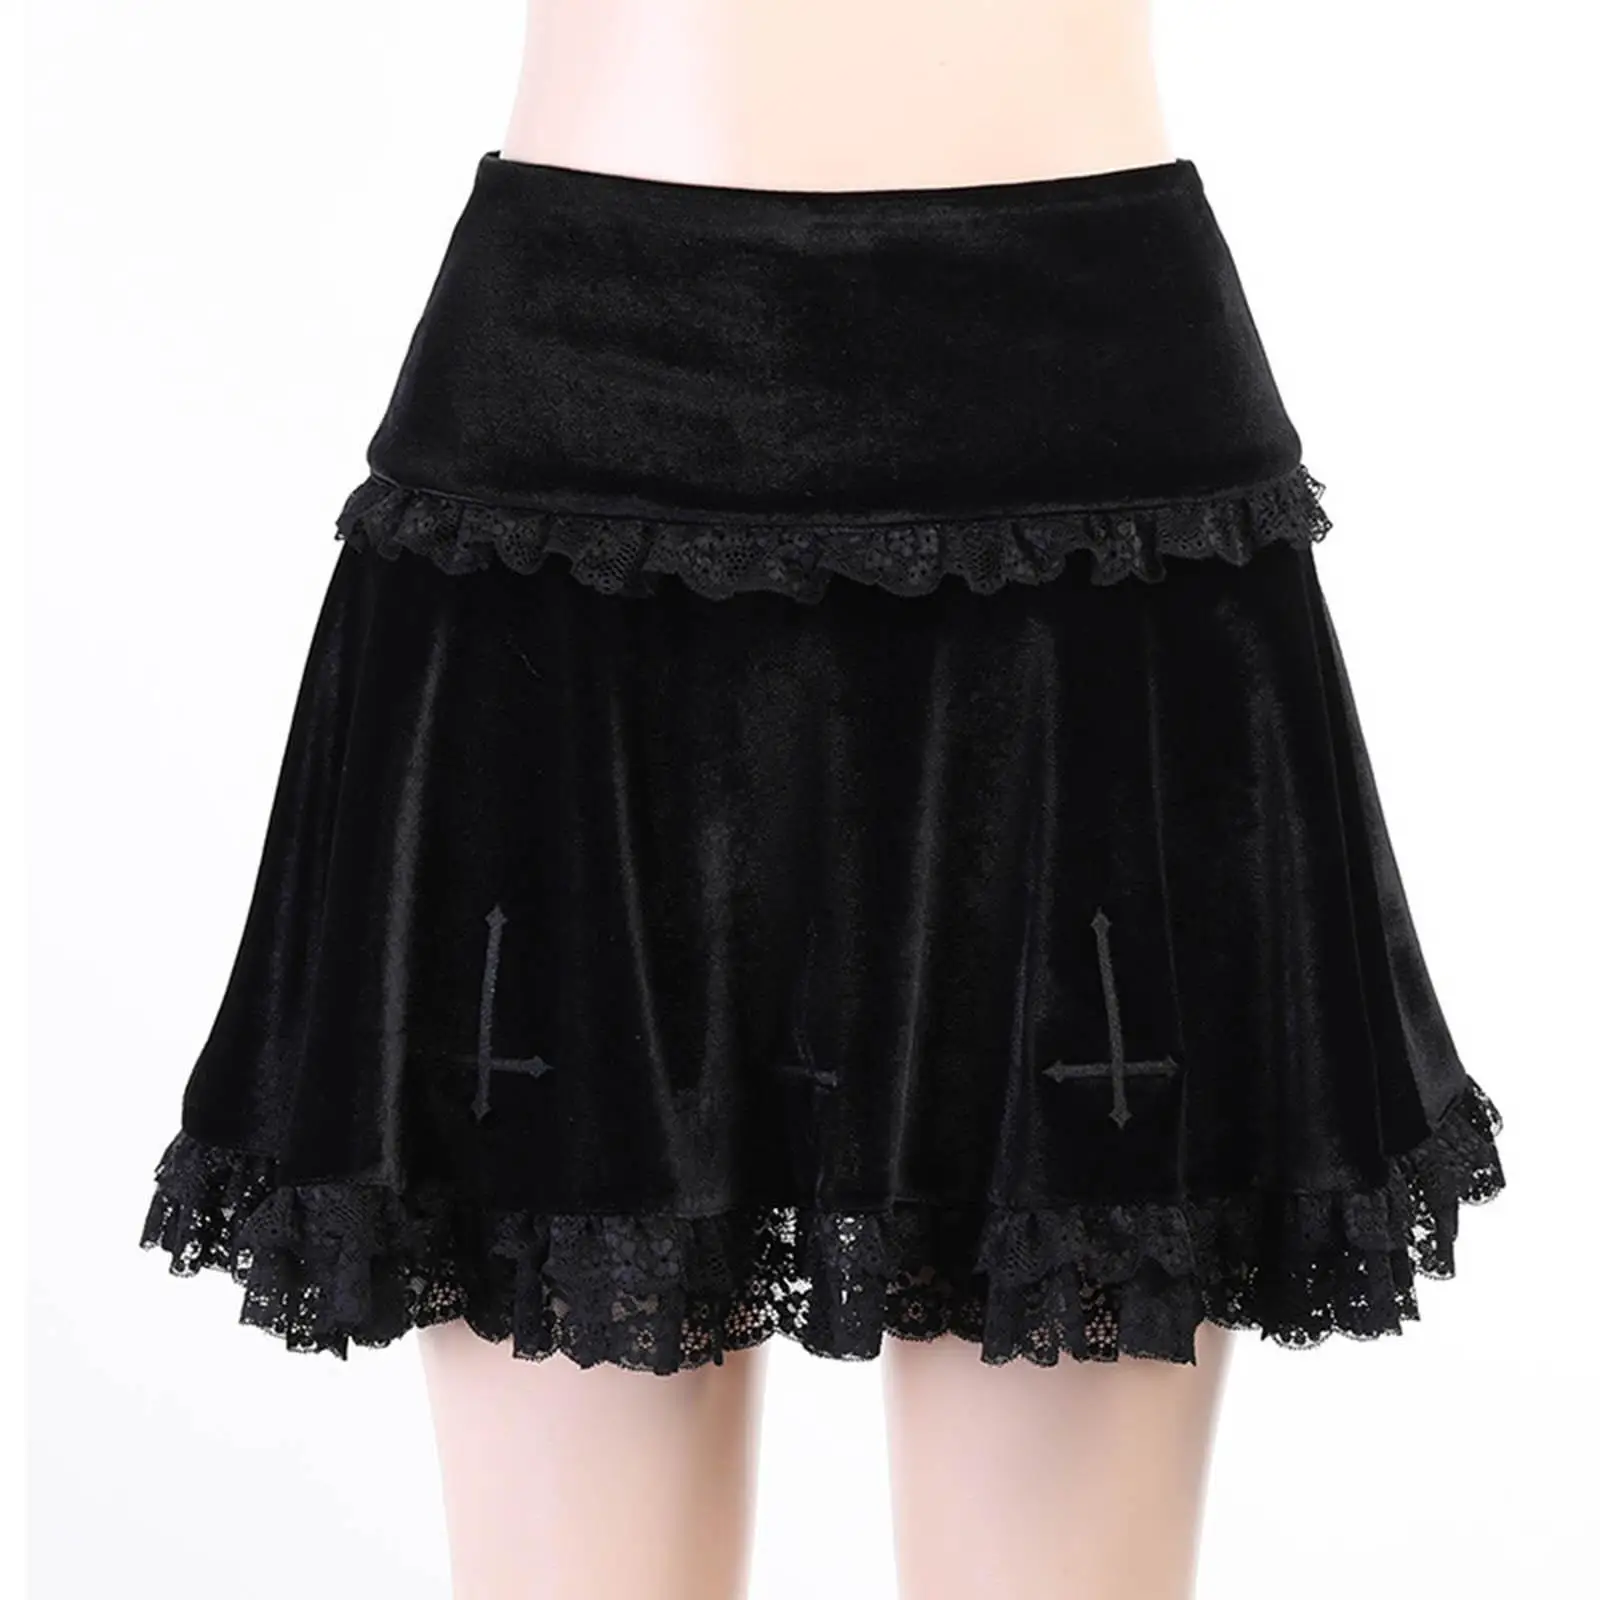 Fashion Pleated Skirt High Waisted Lace Trim Uniform A Line Summer Casual Slim Punk Dark Women Comfortable Short Skirts for Girl